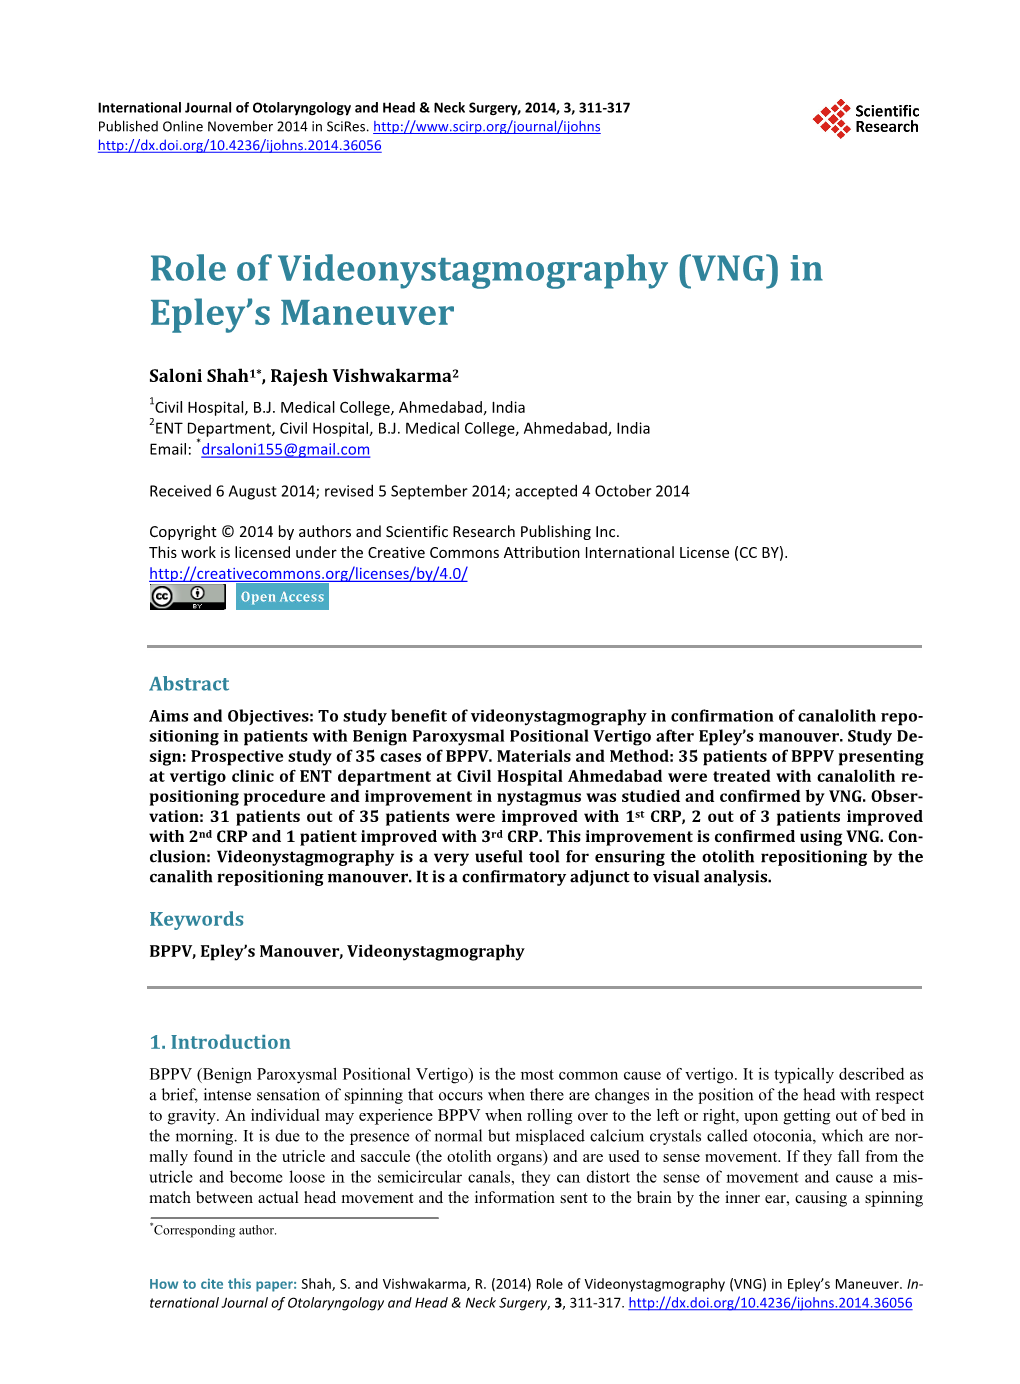 Role of Videonystagmography (VNG) in Epley's Maneuver